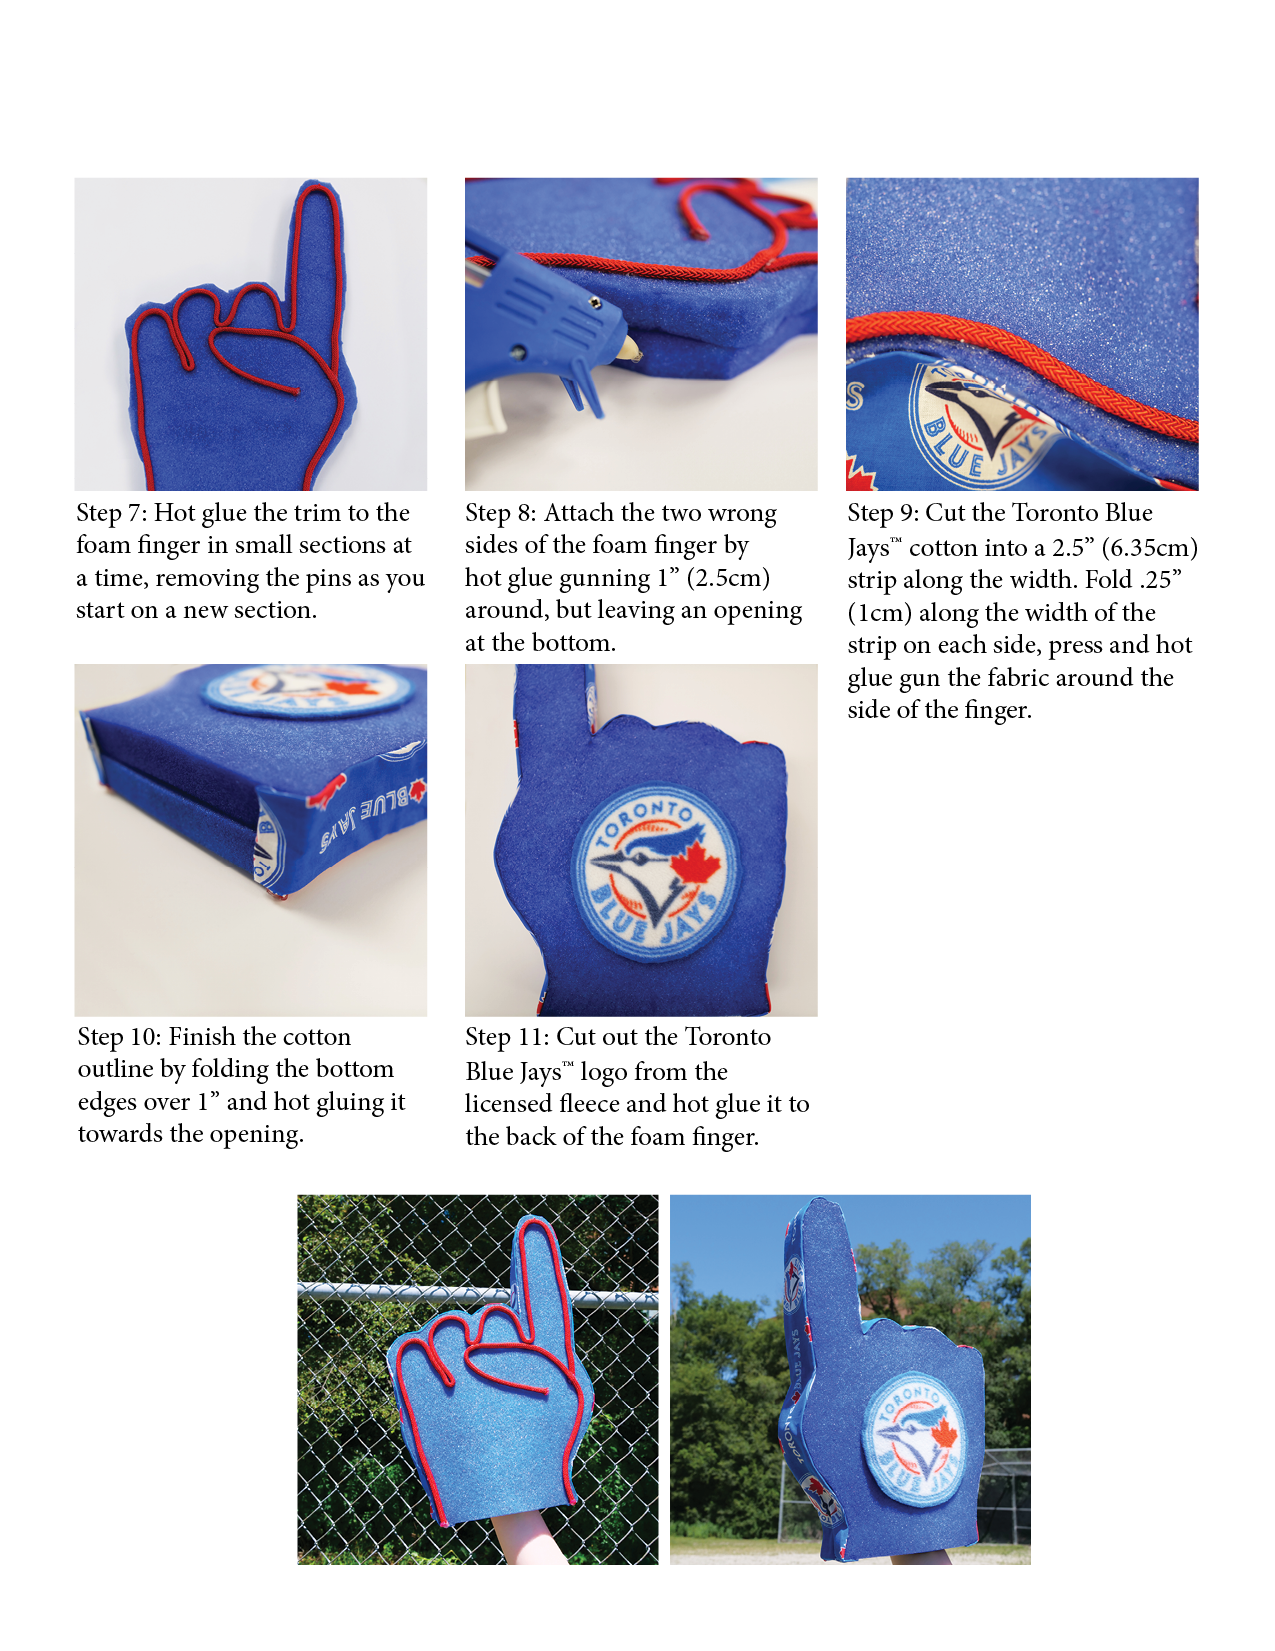 Second set of steps to creating your own foam finger